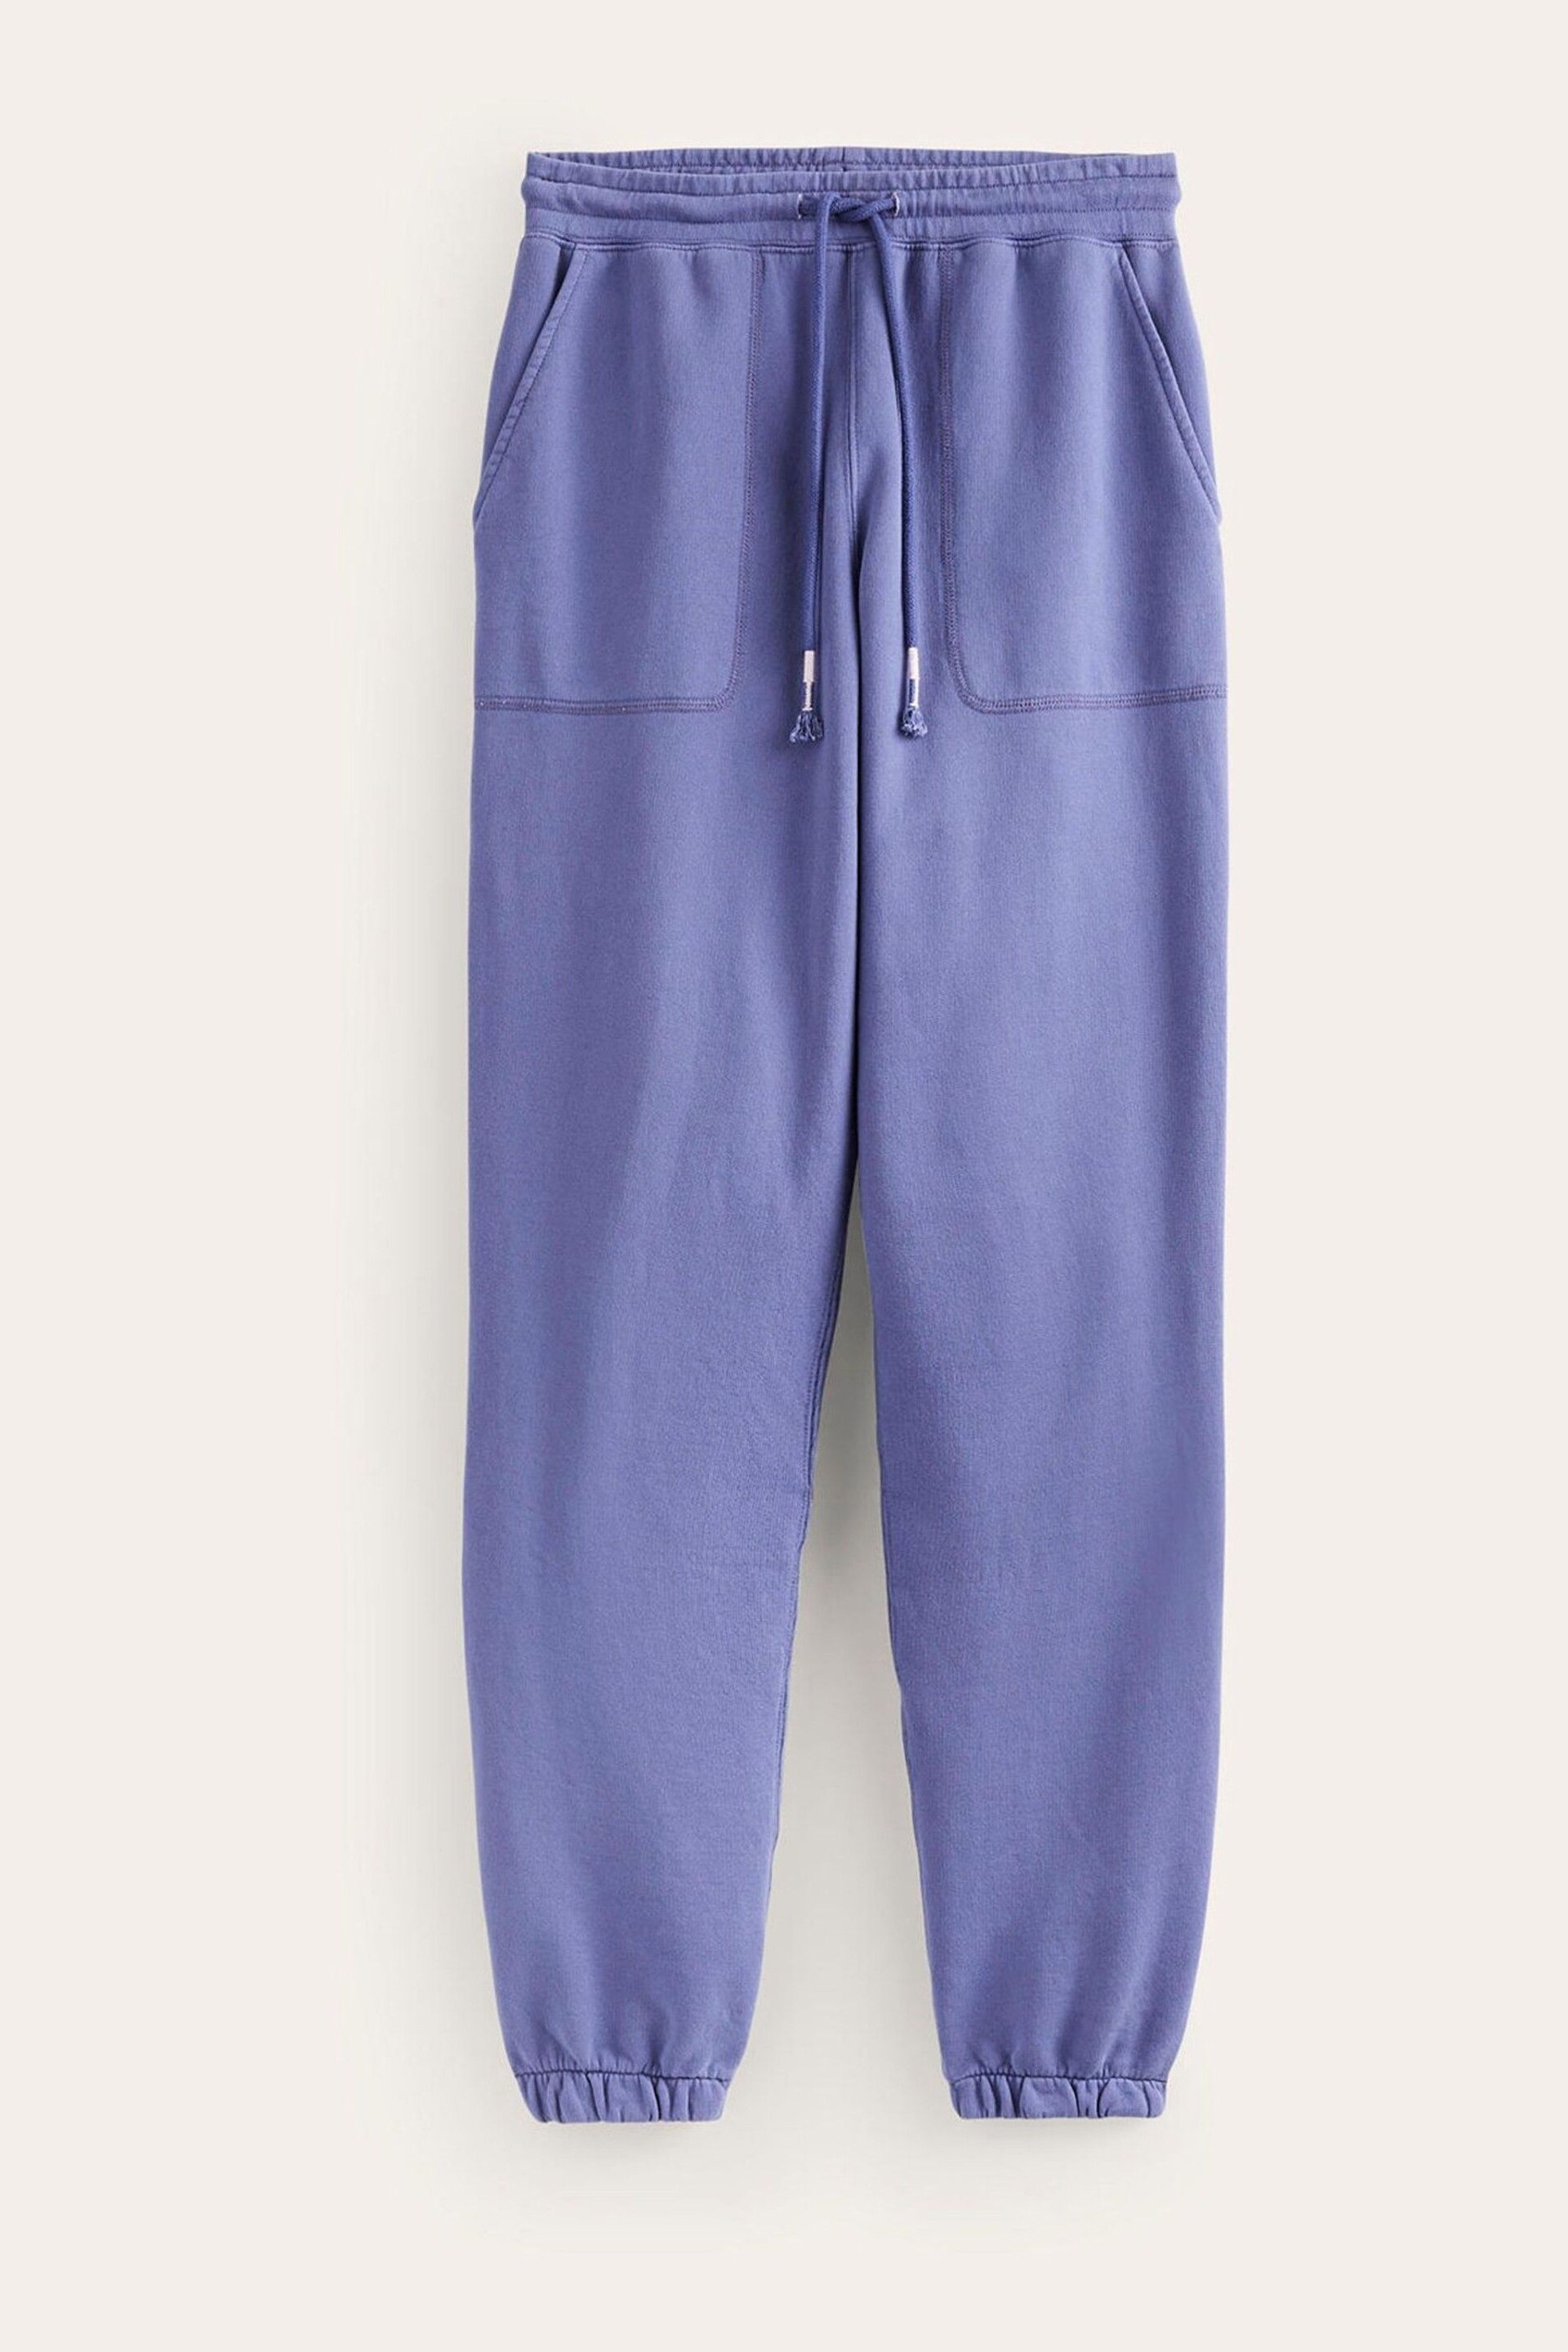 Boden Blue Washed Joggers - Image 5 of 5